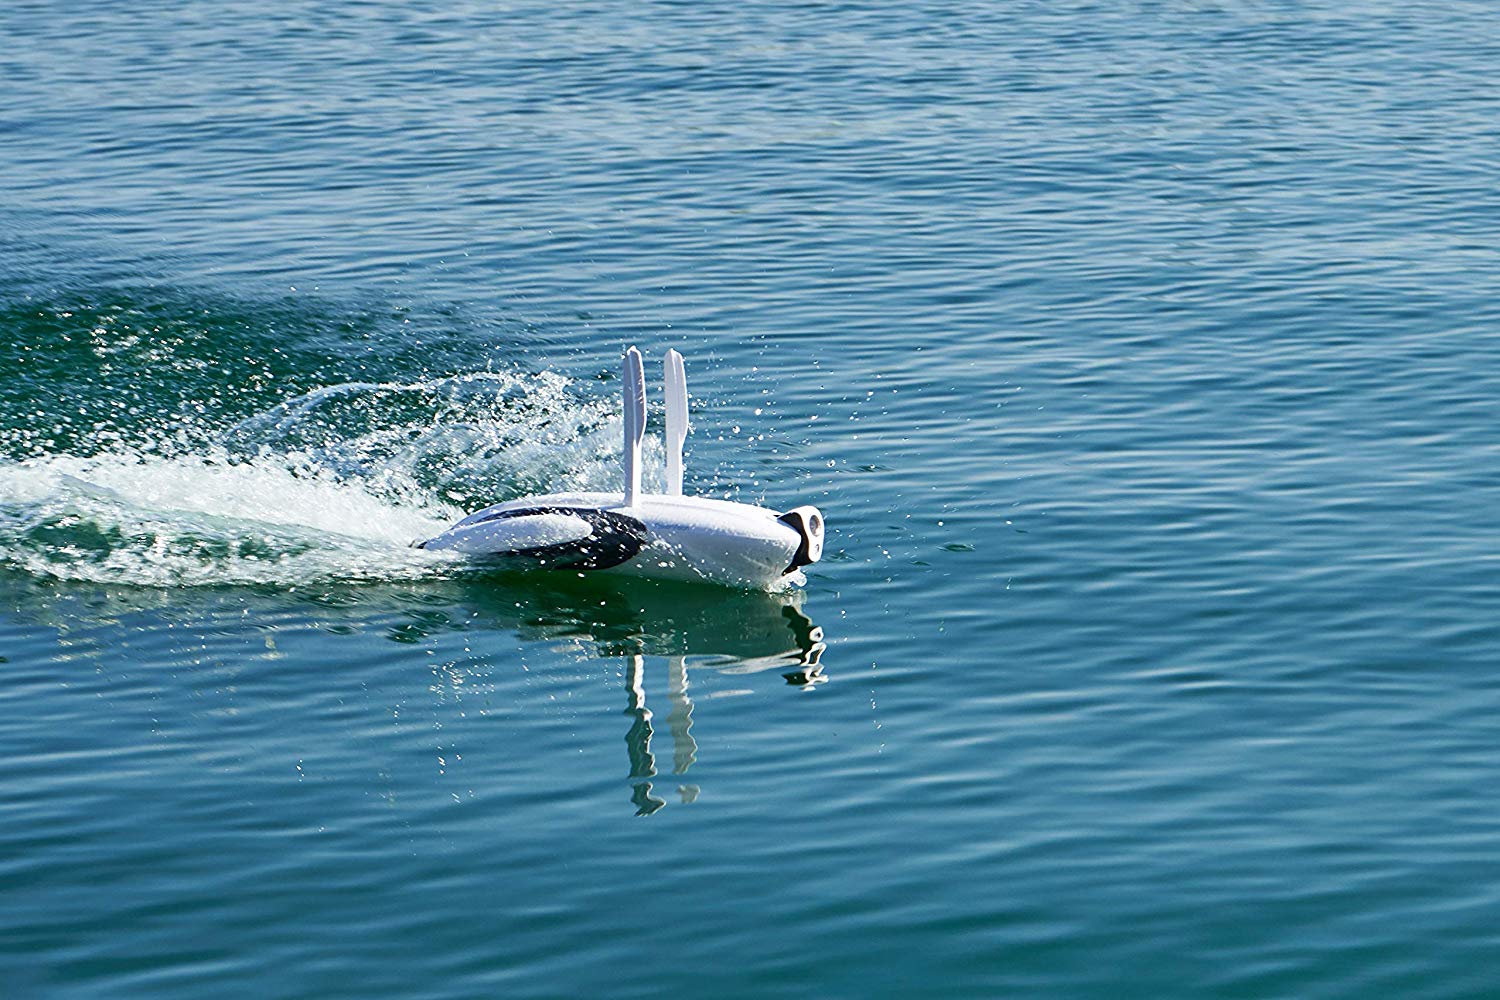 PowerVision Powerdolphin Wizard Water Surface Drone with 4K UHD Camera